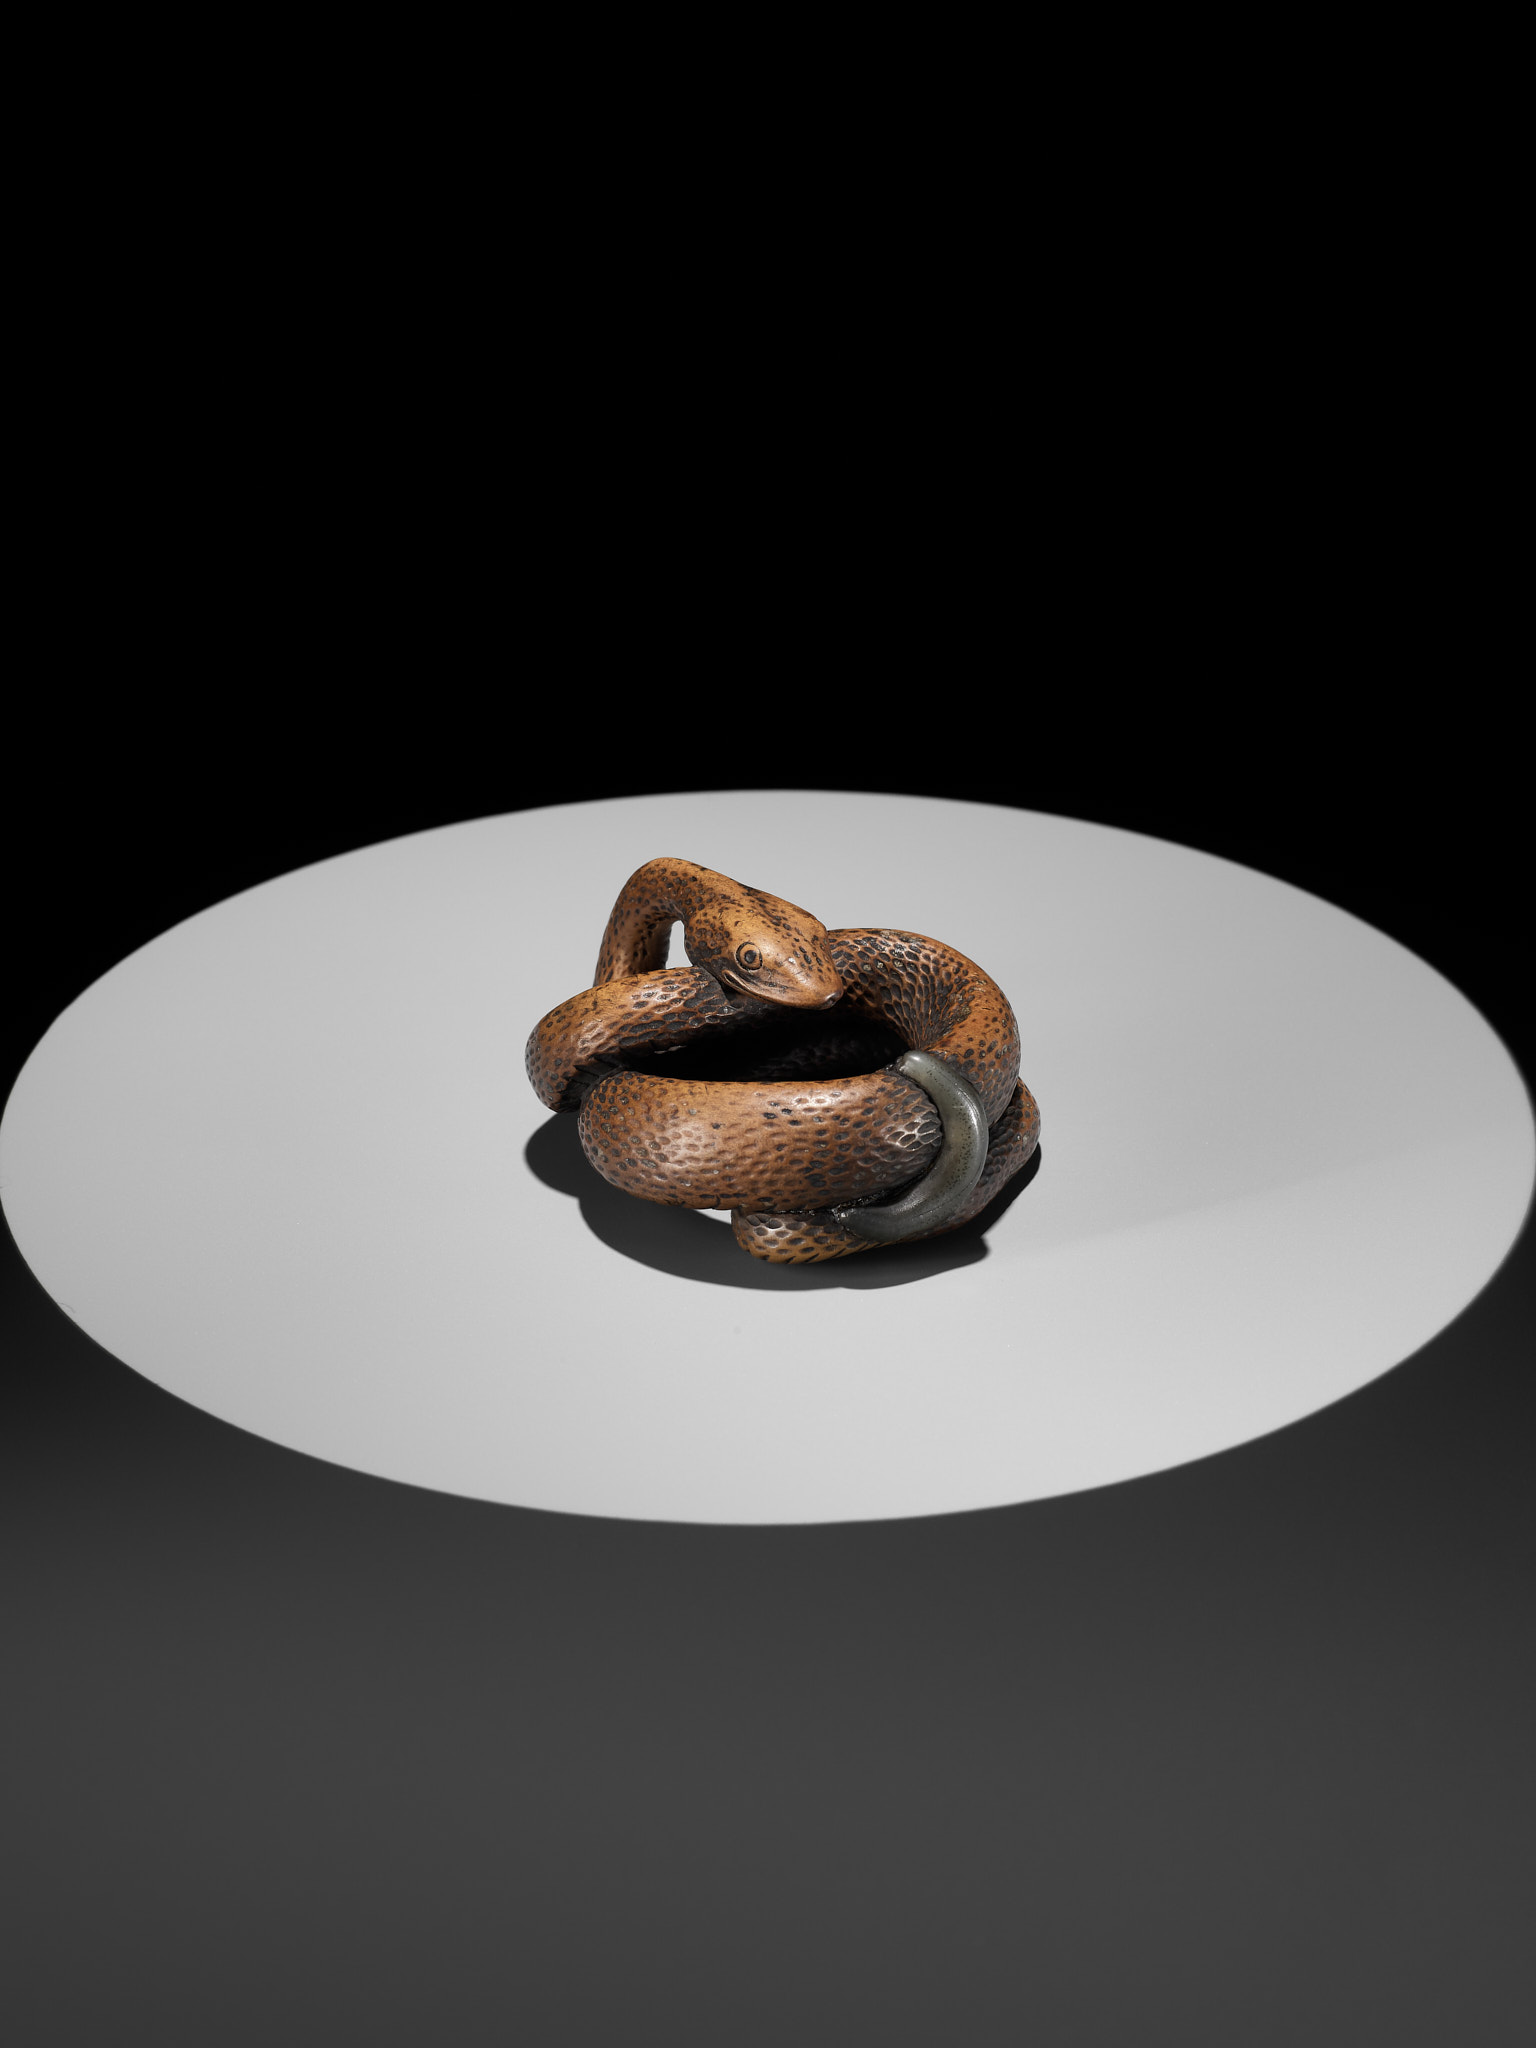 A LARGE AND POWERFUL WOOD NETSUKE OF A COILED SNAKE WITH AN INLAID SLUG BY TOMOKAZU - Image 2 of 13